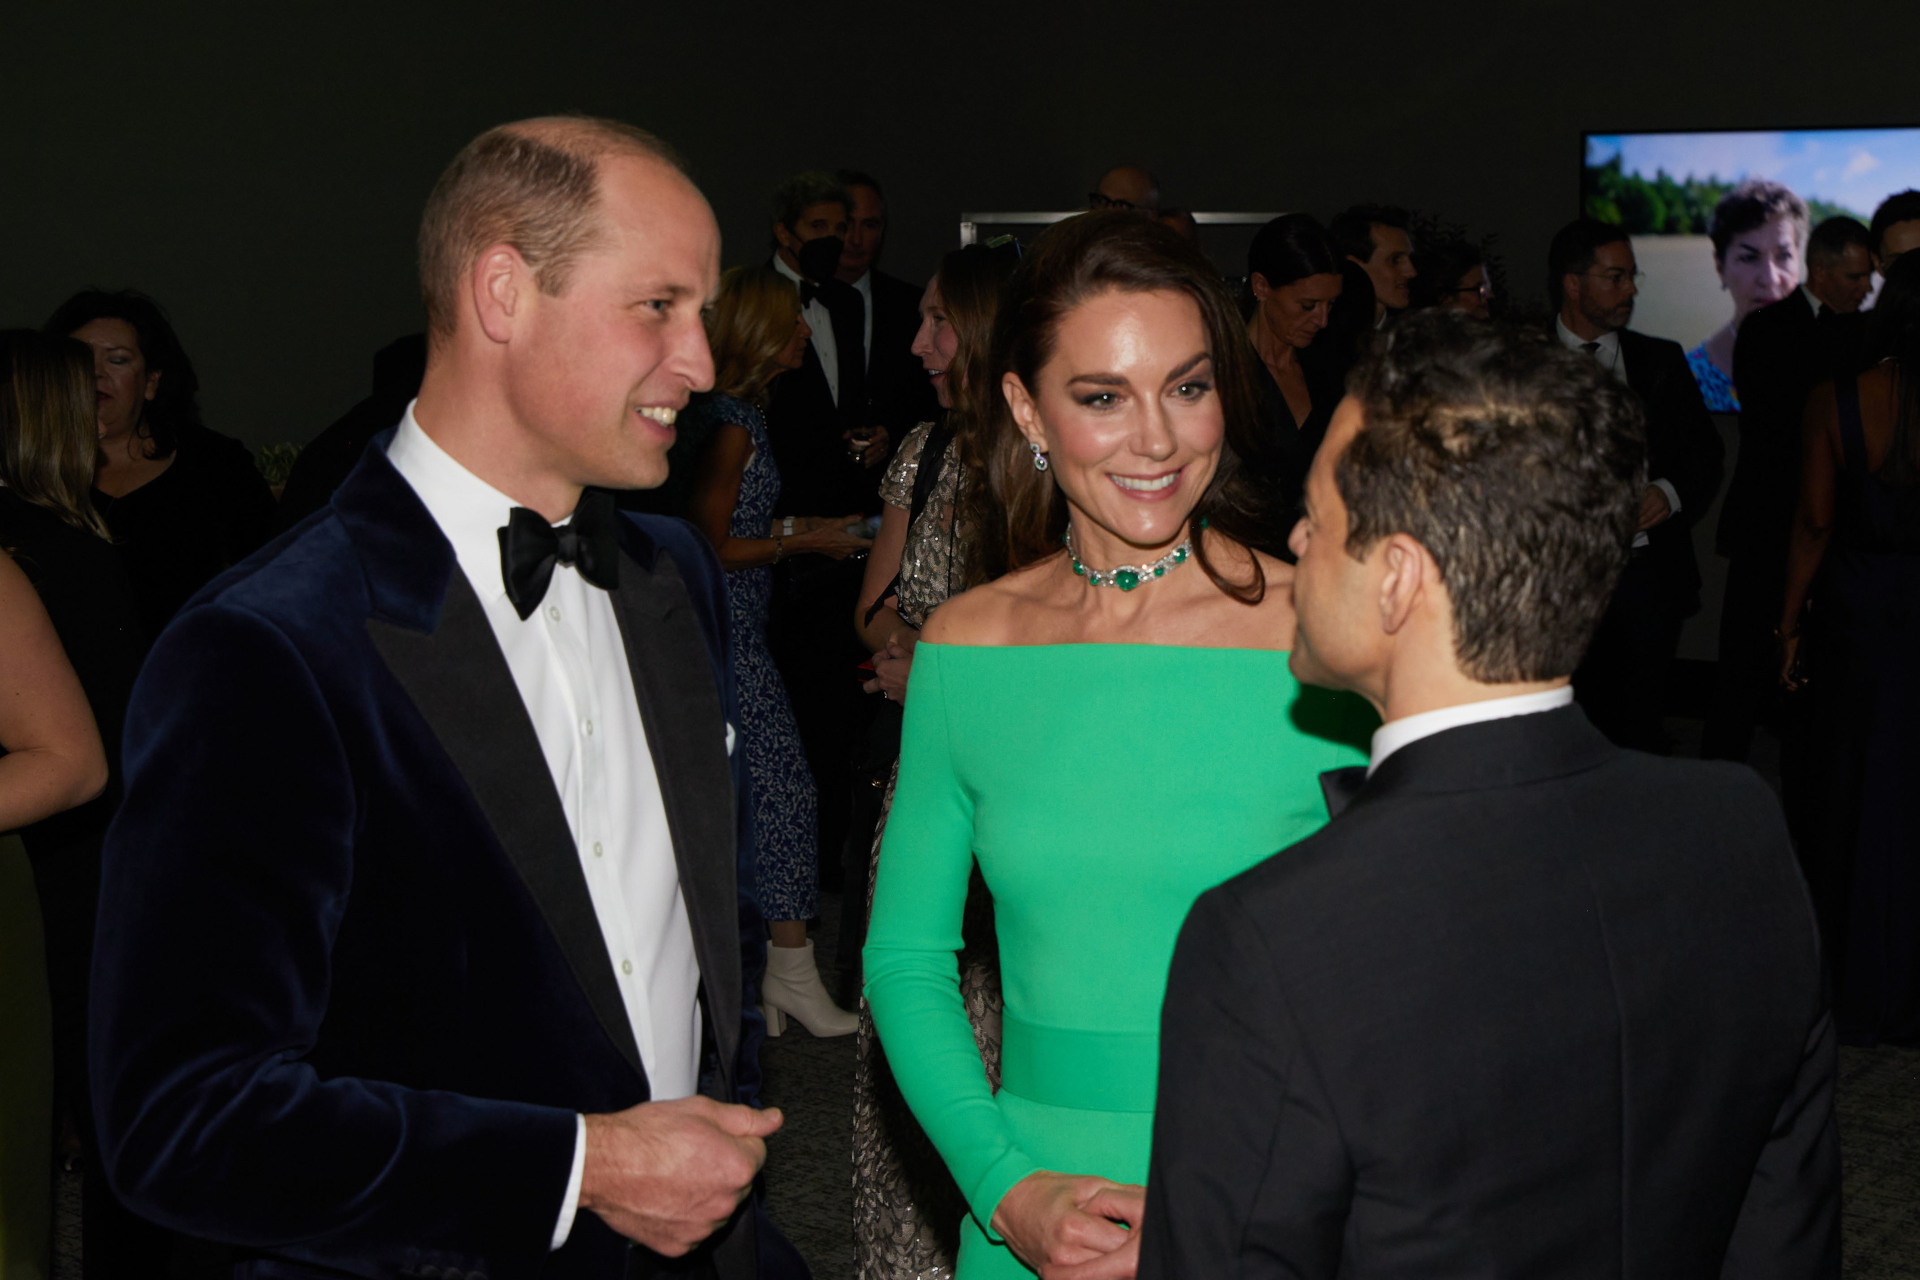 The Prince and Princess of Wales and Rami Malek at The Earthshot Prize